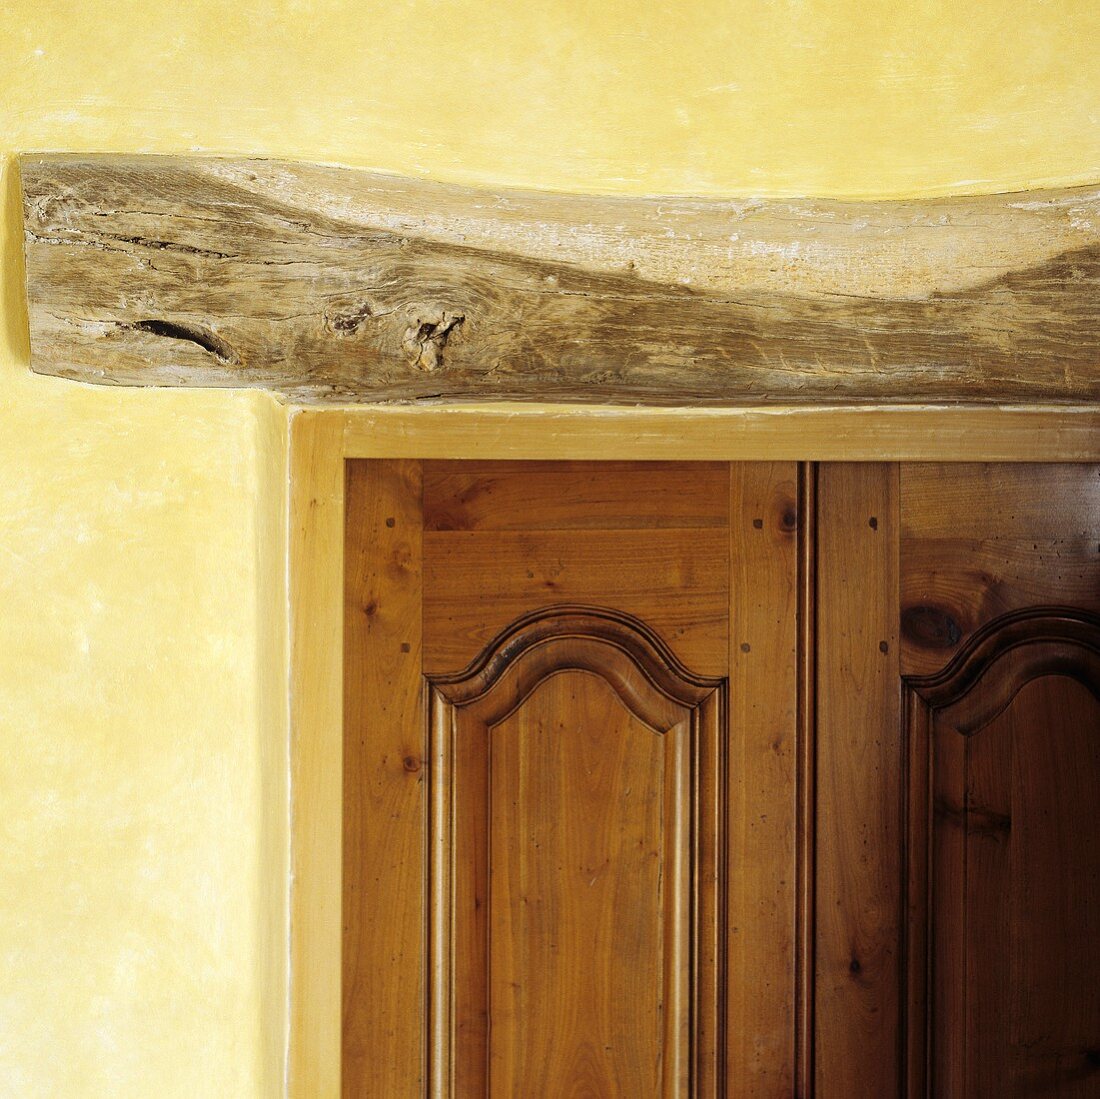 A wooden beam above a door set into a yellow-painted wall